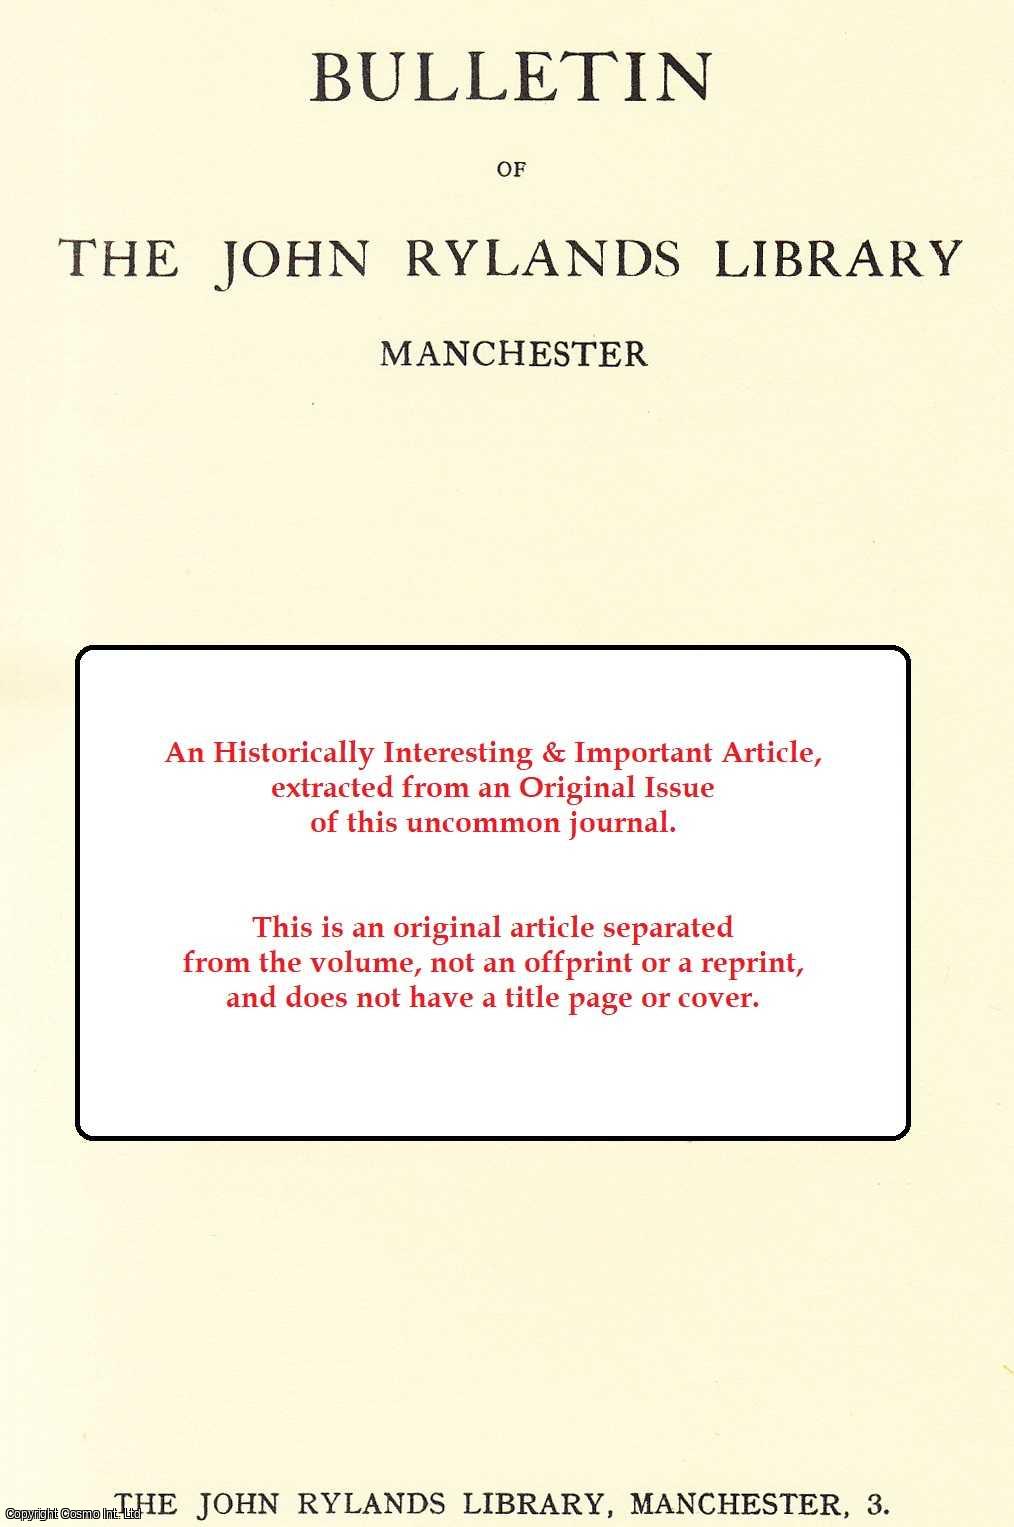 T.W. Manson - The Life of Jesus: A Survey of the Available Material, the Fourth Gospel. An original article from the Bulletin of the John Rylands Library Manchester, 1947.